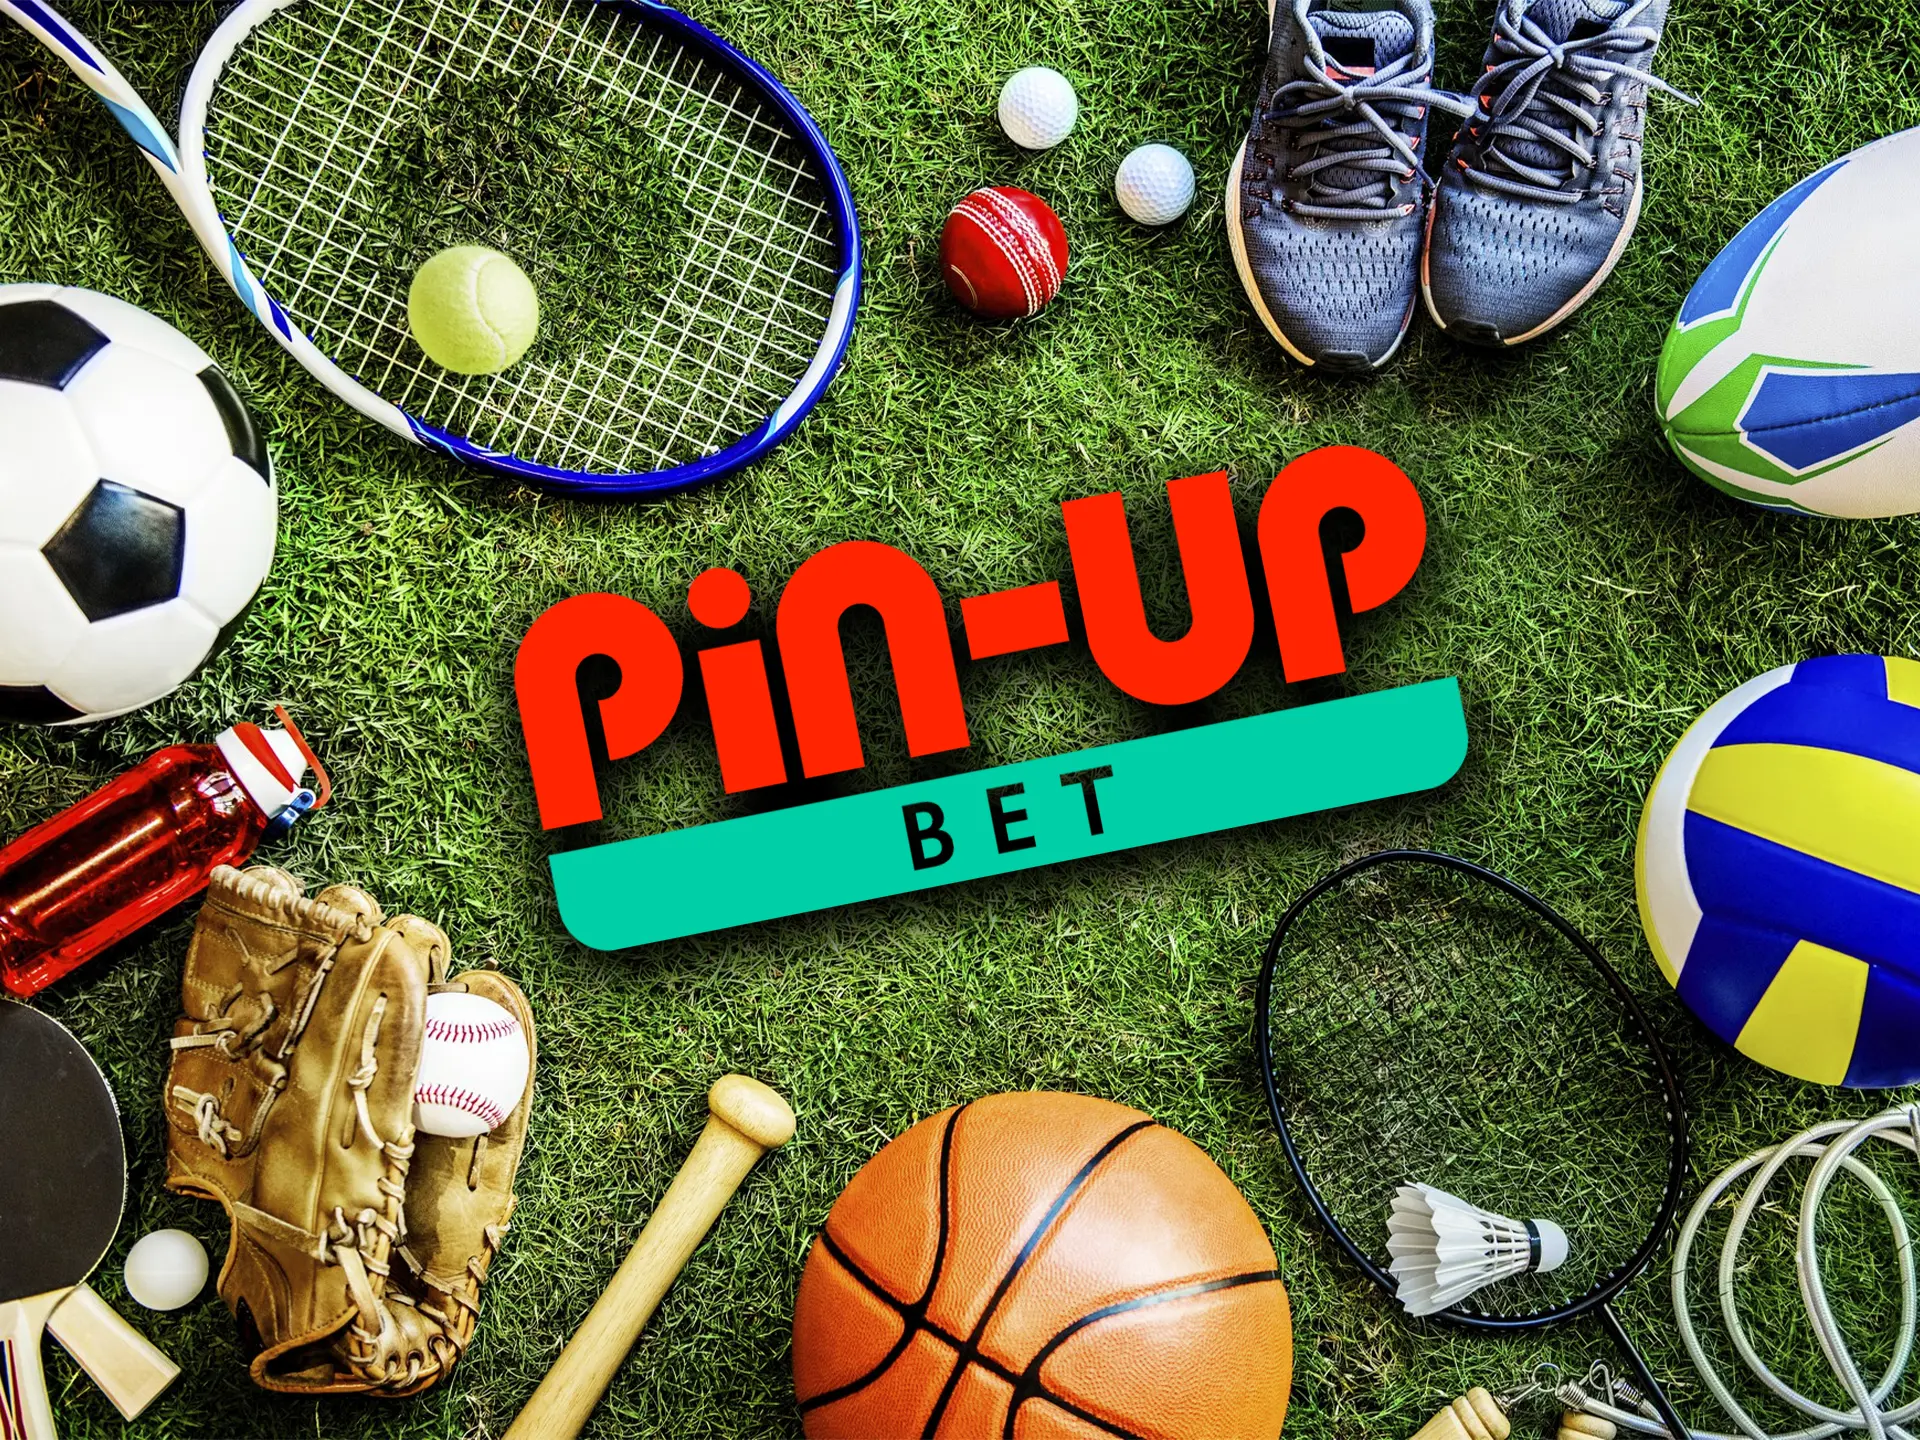 Pin Up provides various sports to bet on.